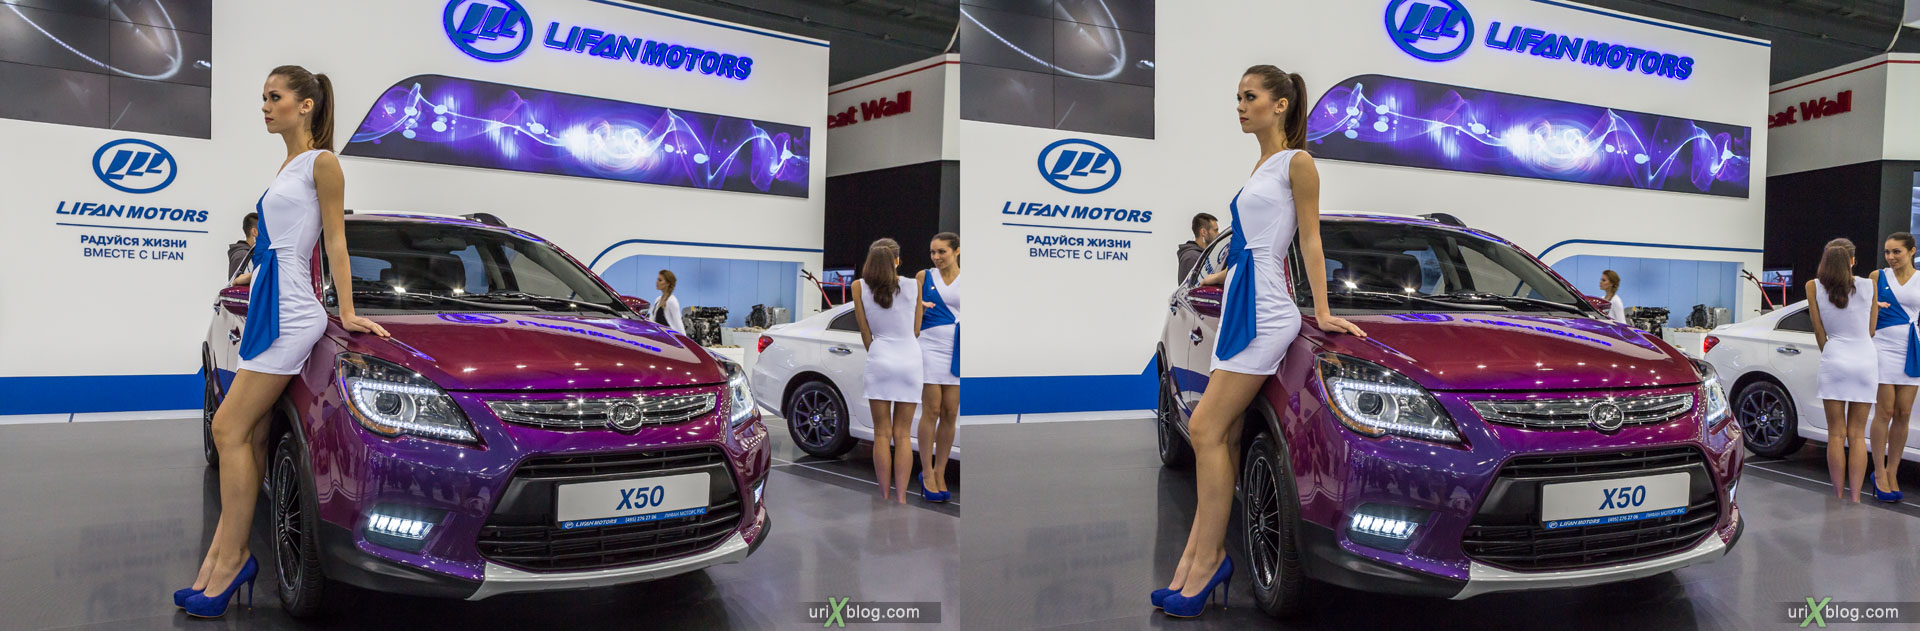 Lifan X50, Moscow International Automobile Salon 2014, MIAS 2014, girls, models, Crocus Expo, Moscow, Russia, 3D, stereo pair, cross-eyed, crossview, cross view stereo pair, stereoscopic, 2014